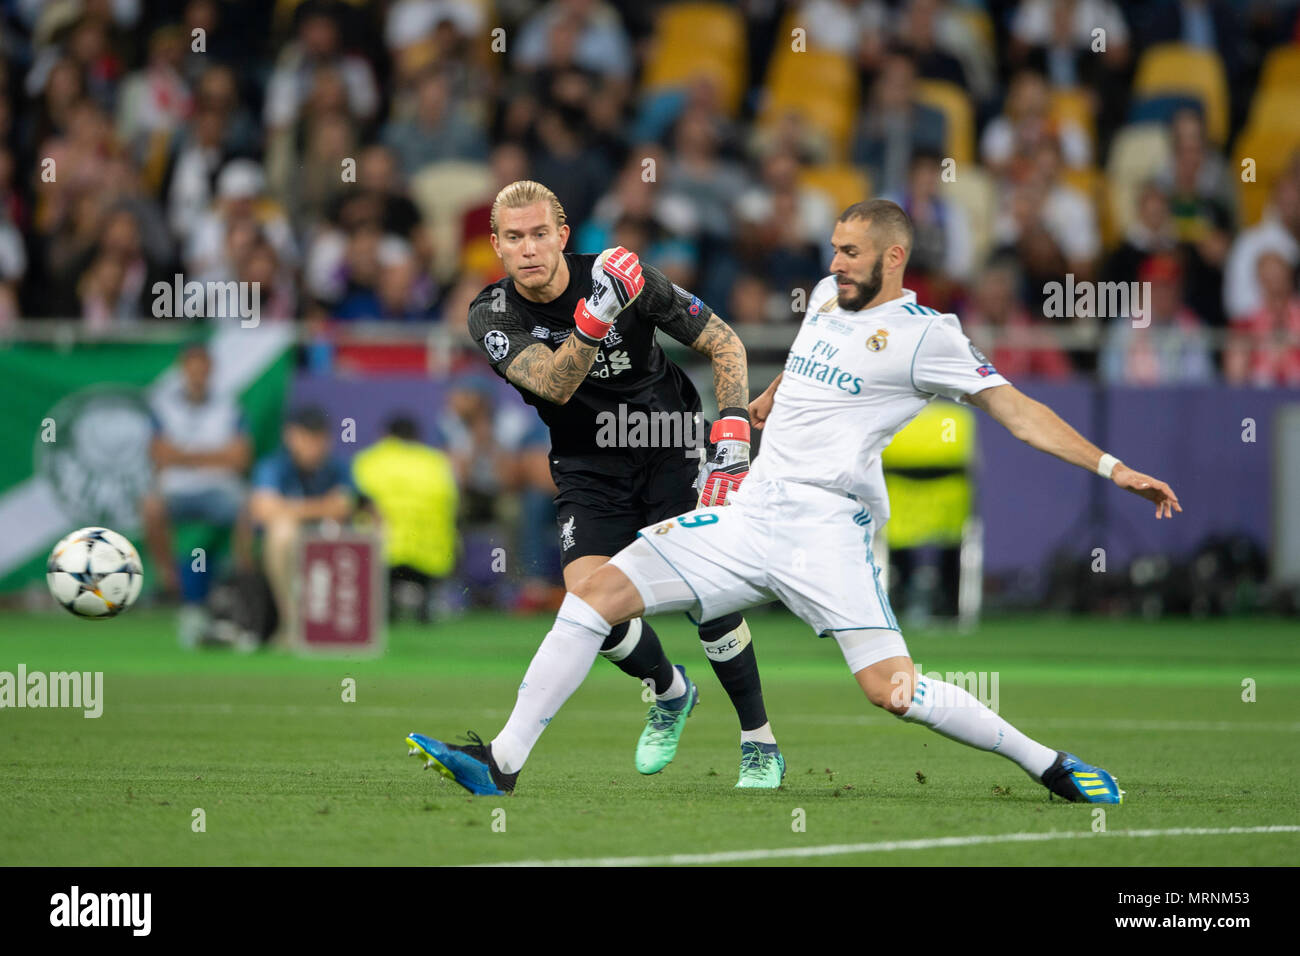 Karim Mostafa Benzema of Real Madrid he scored the first goal for his team    during the UEFA Champions League Final match between Real Madrid CF 3-1  Liverpool FC at NSC Olimpiyskiy Stadium in Kiev, Ukraine, on May 26, 2018. (Photo by Maurizio Borsari/AFLO) Stock Photo